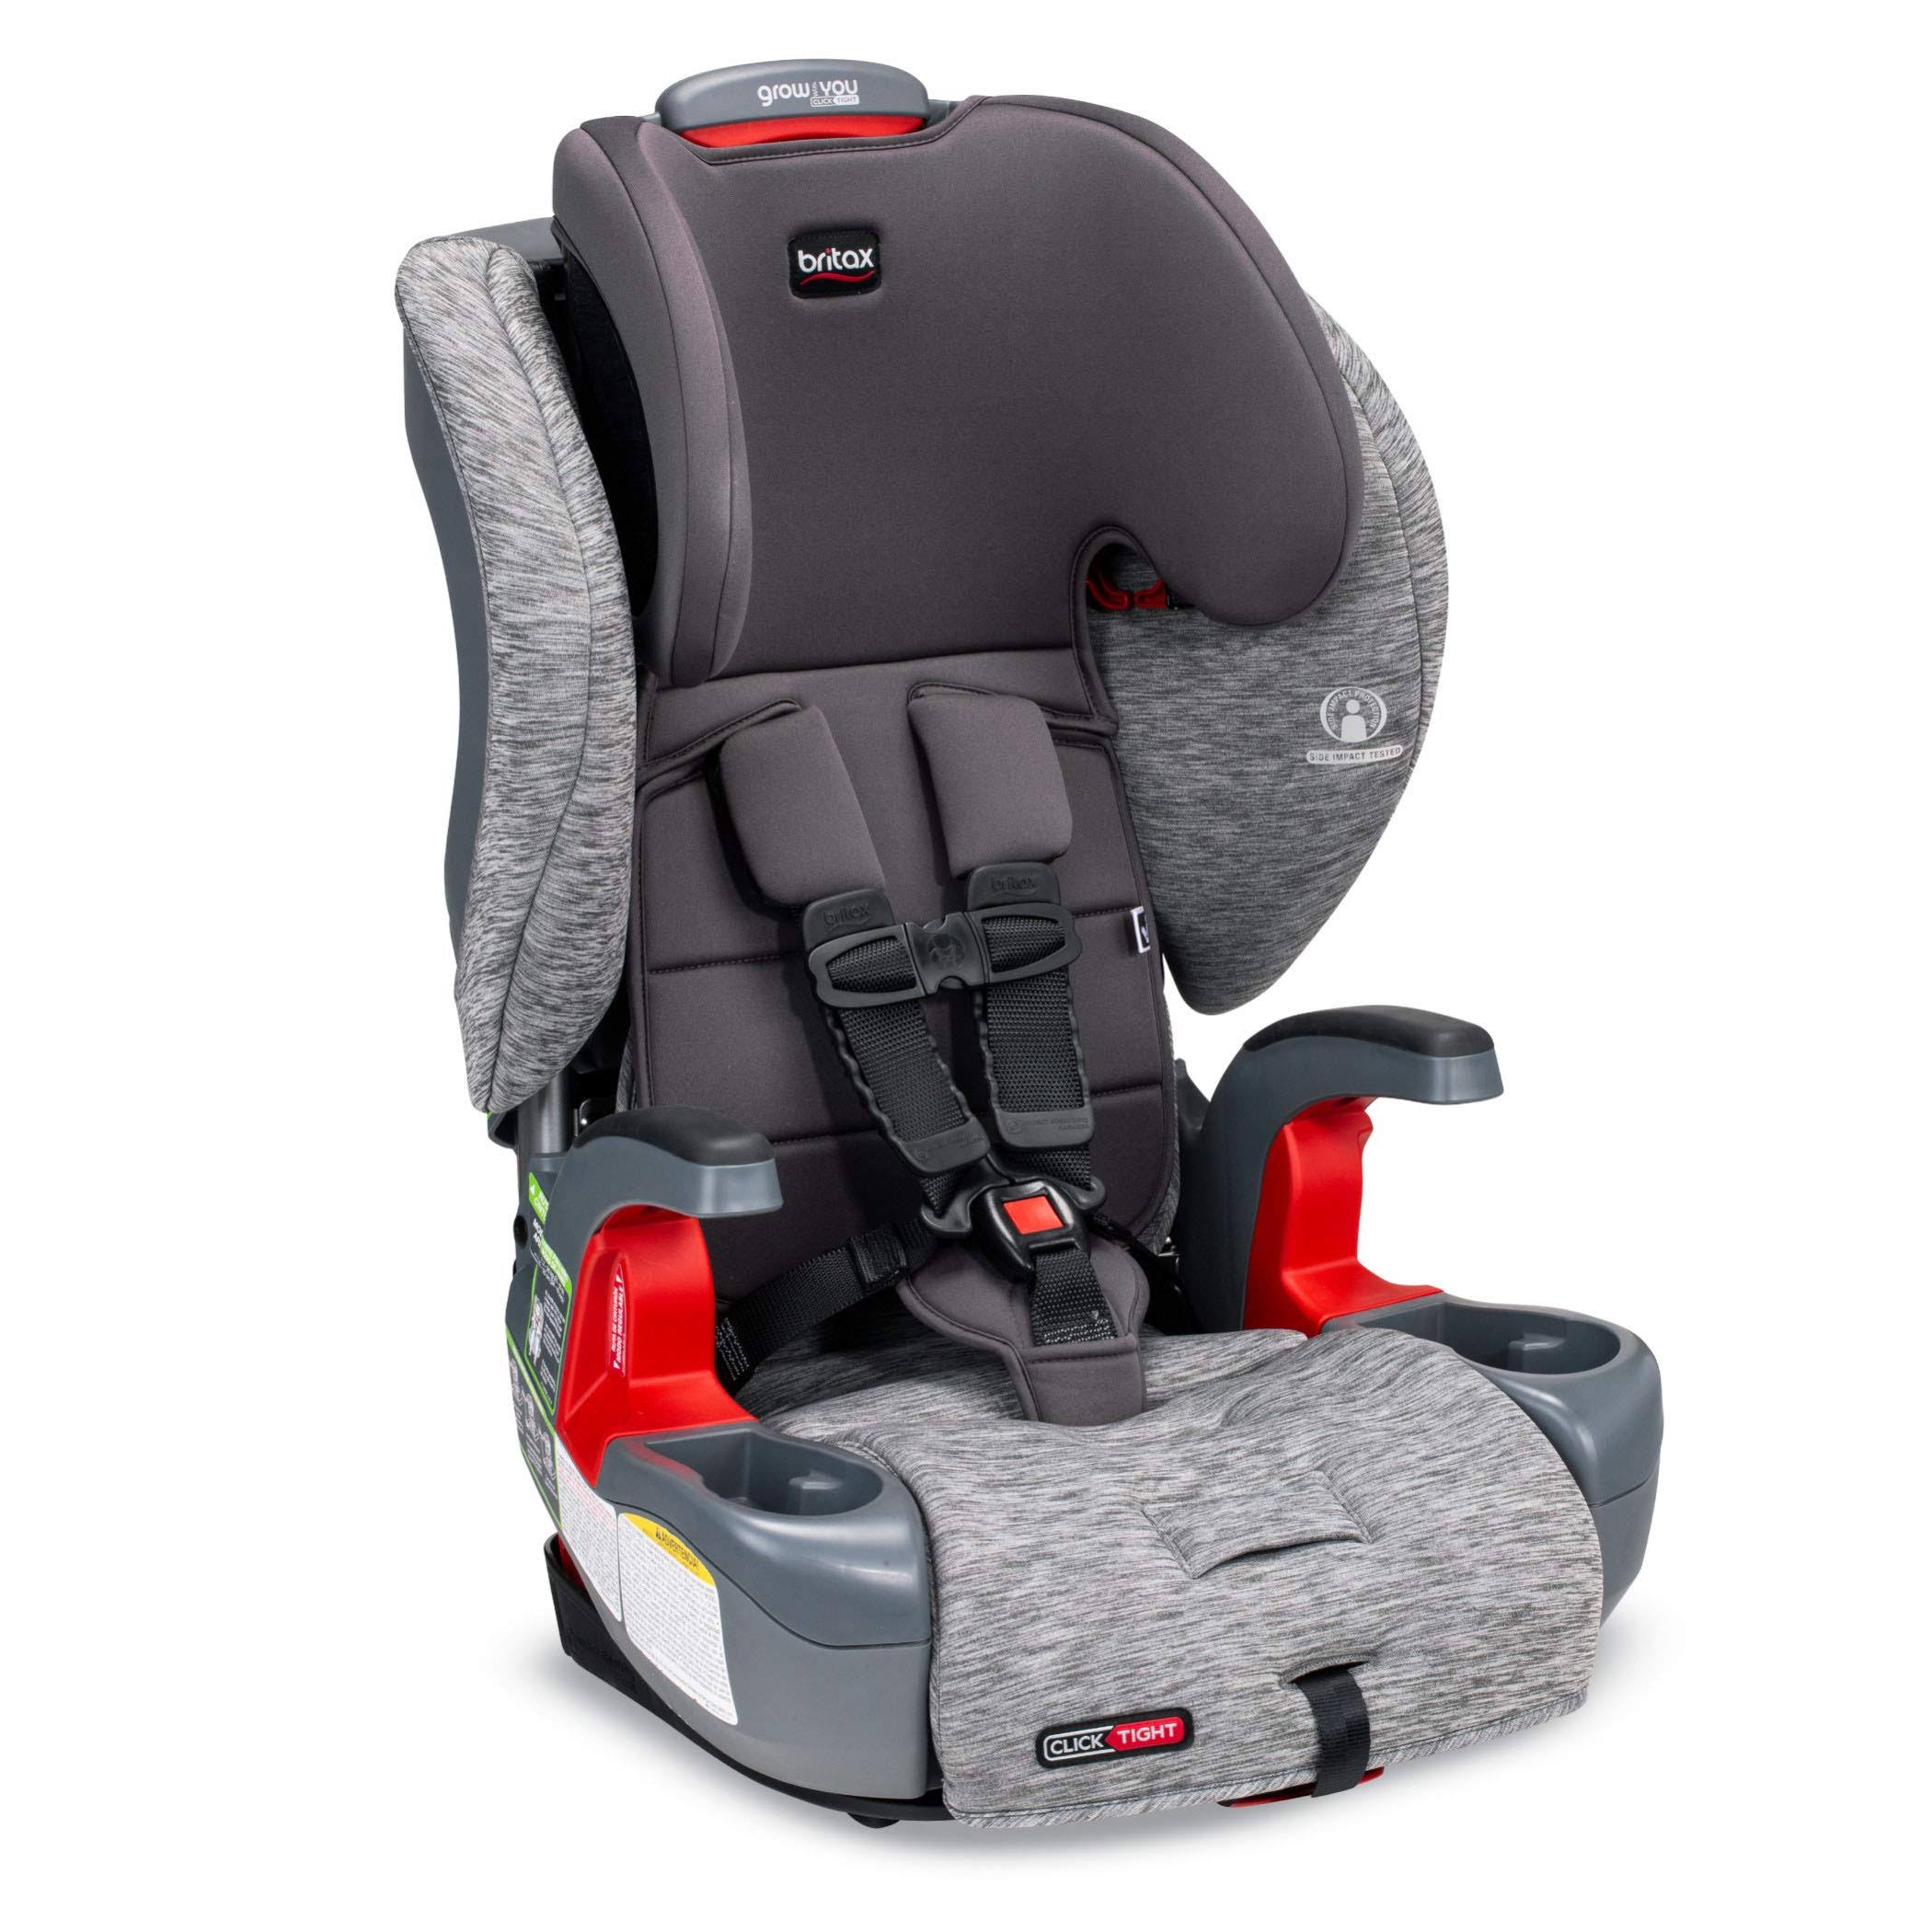 Britax Grow with You ClickTight Harness-2-Booster Car Seat, Asher